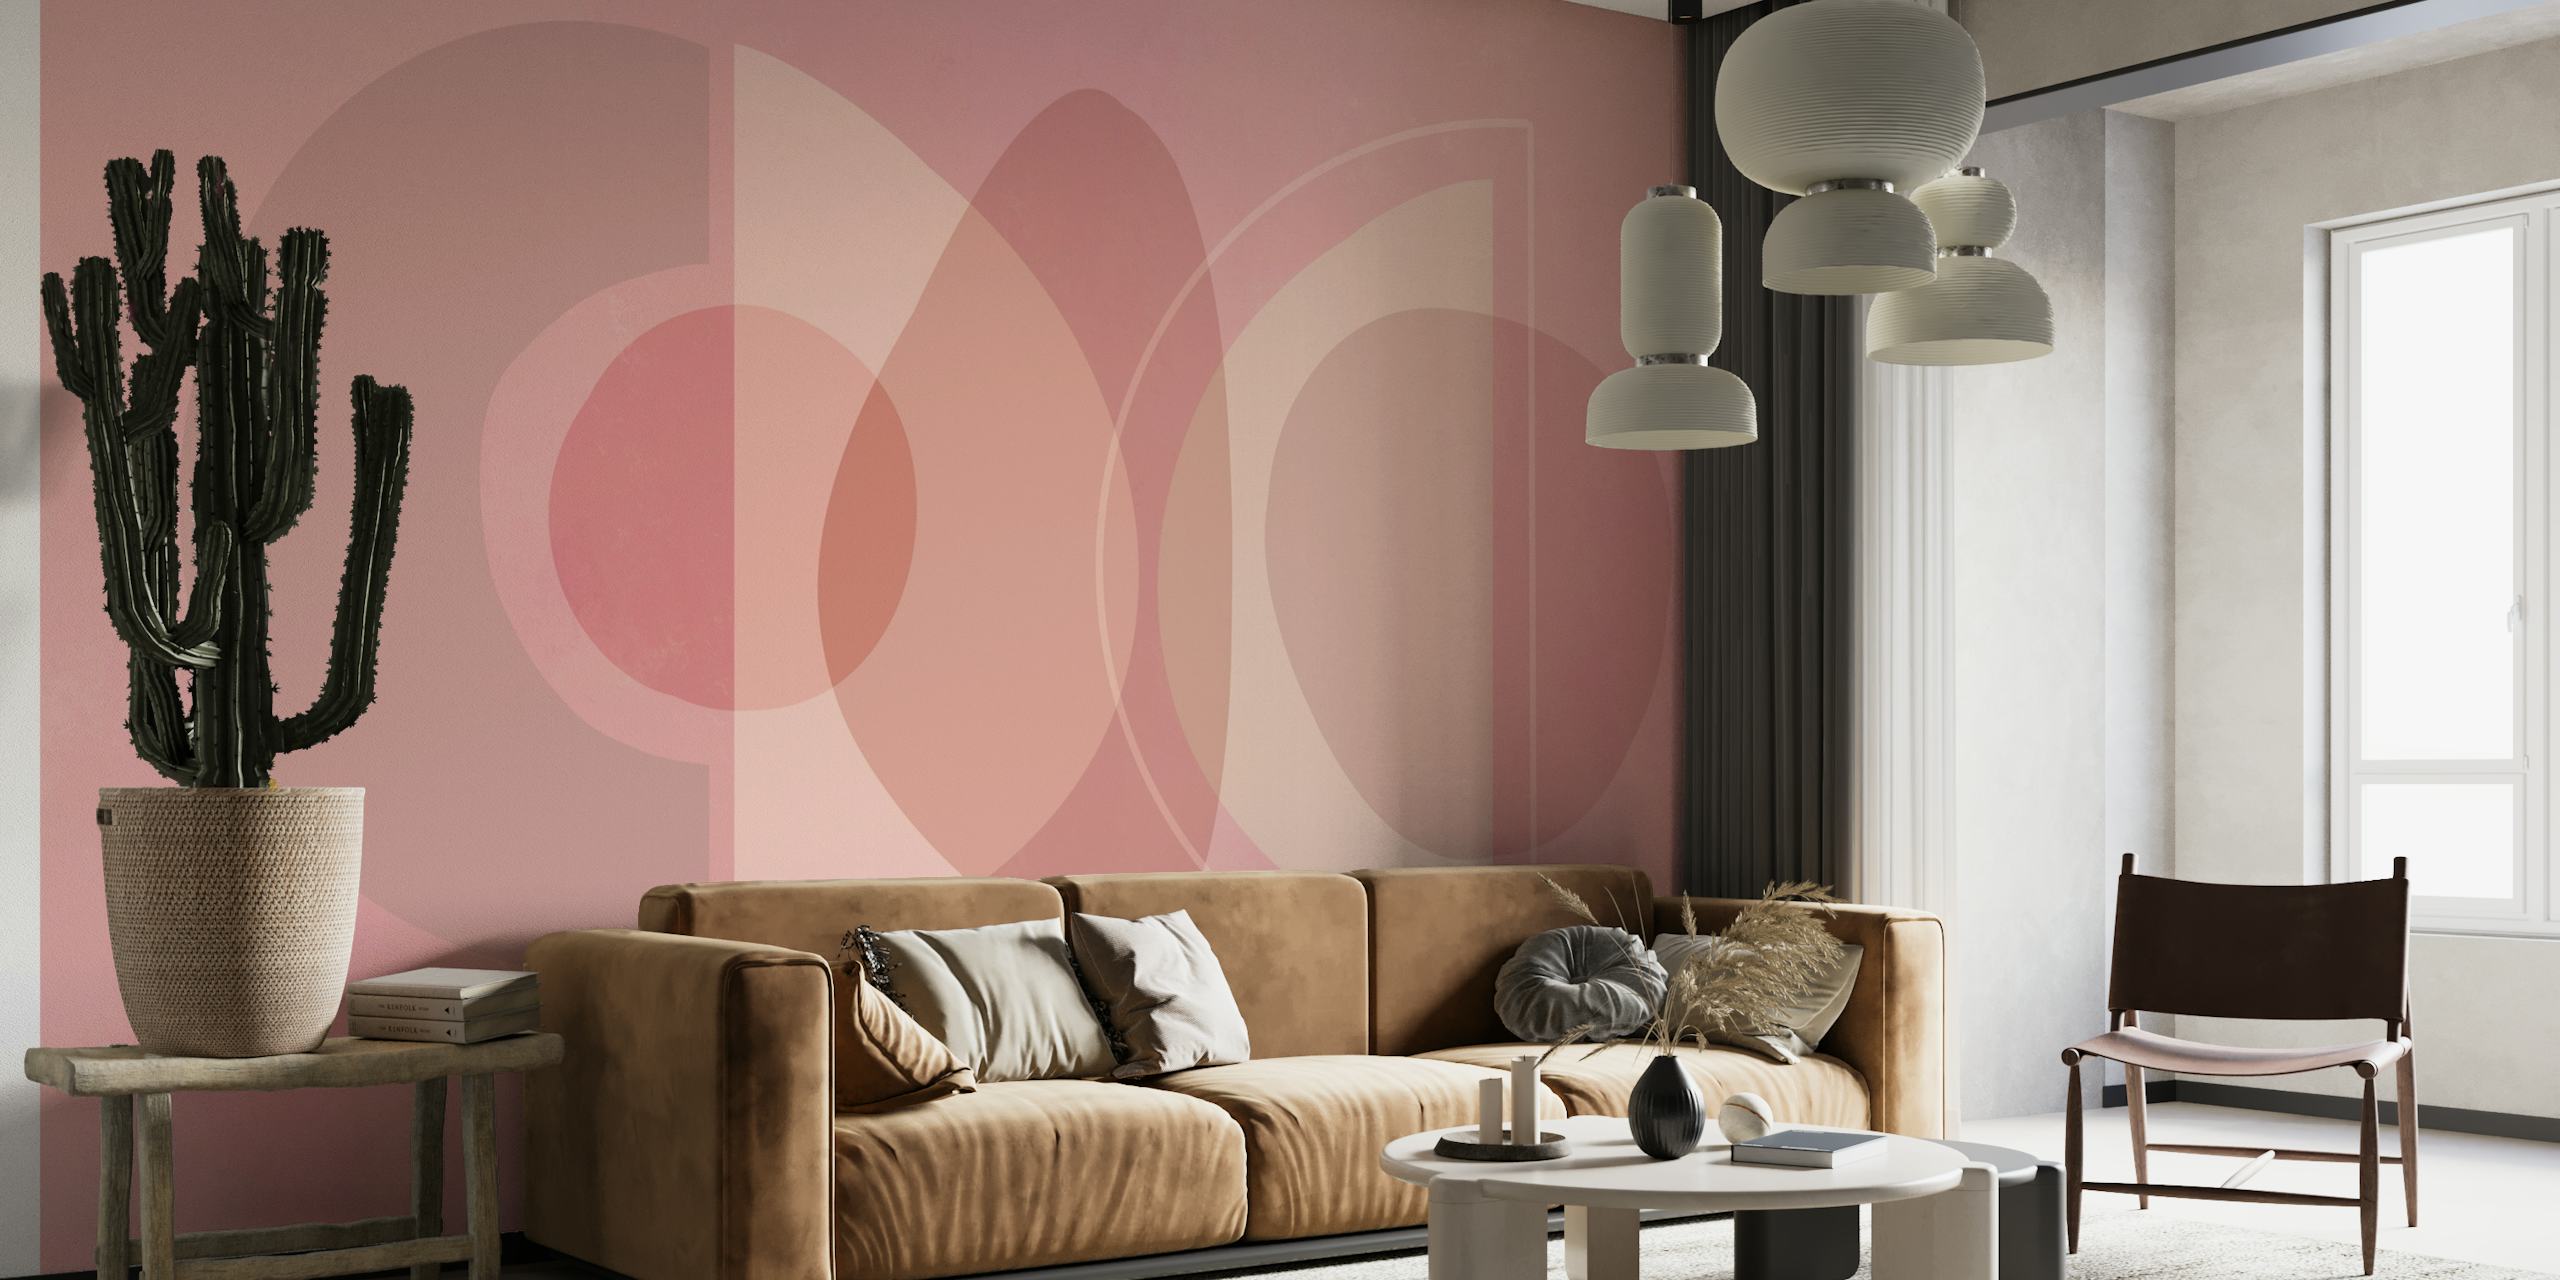 Mid Century Eclectic Calm Vibes In Pastel Blush Pink Peach Shapes papel pintado